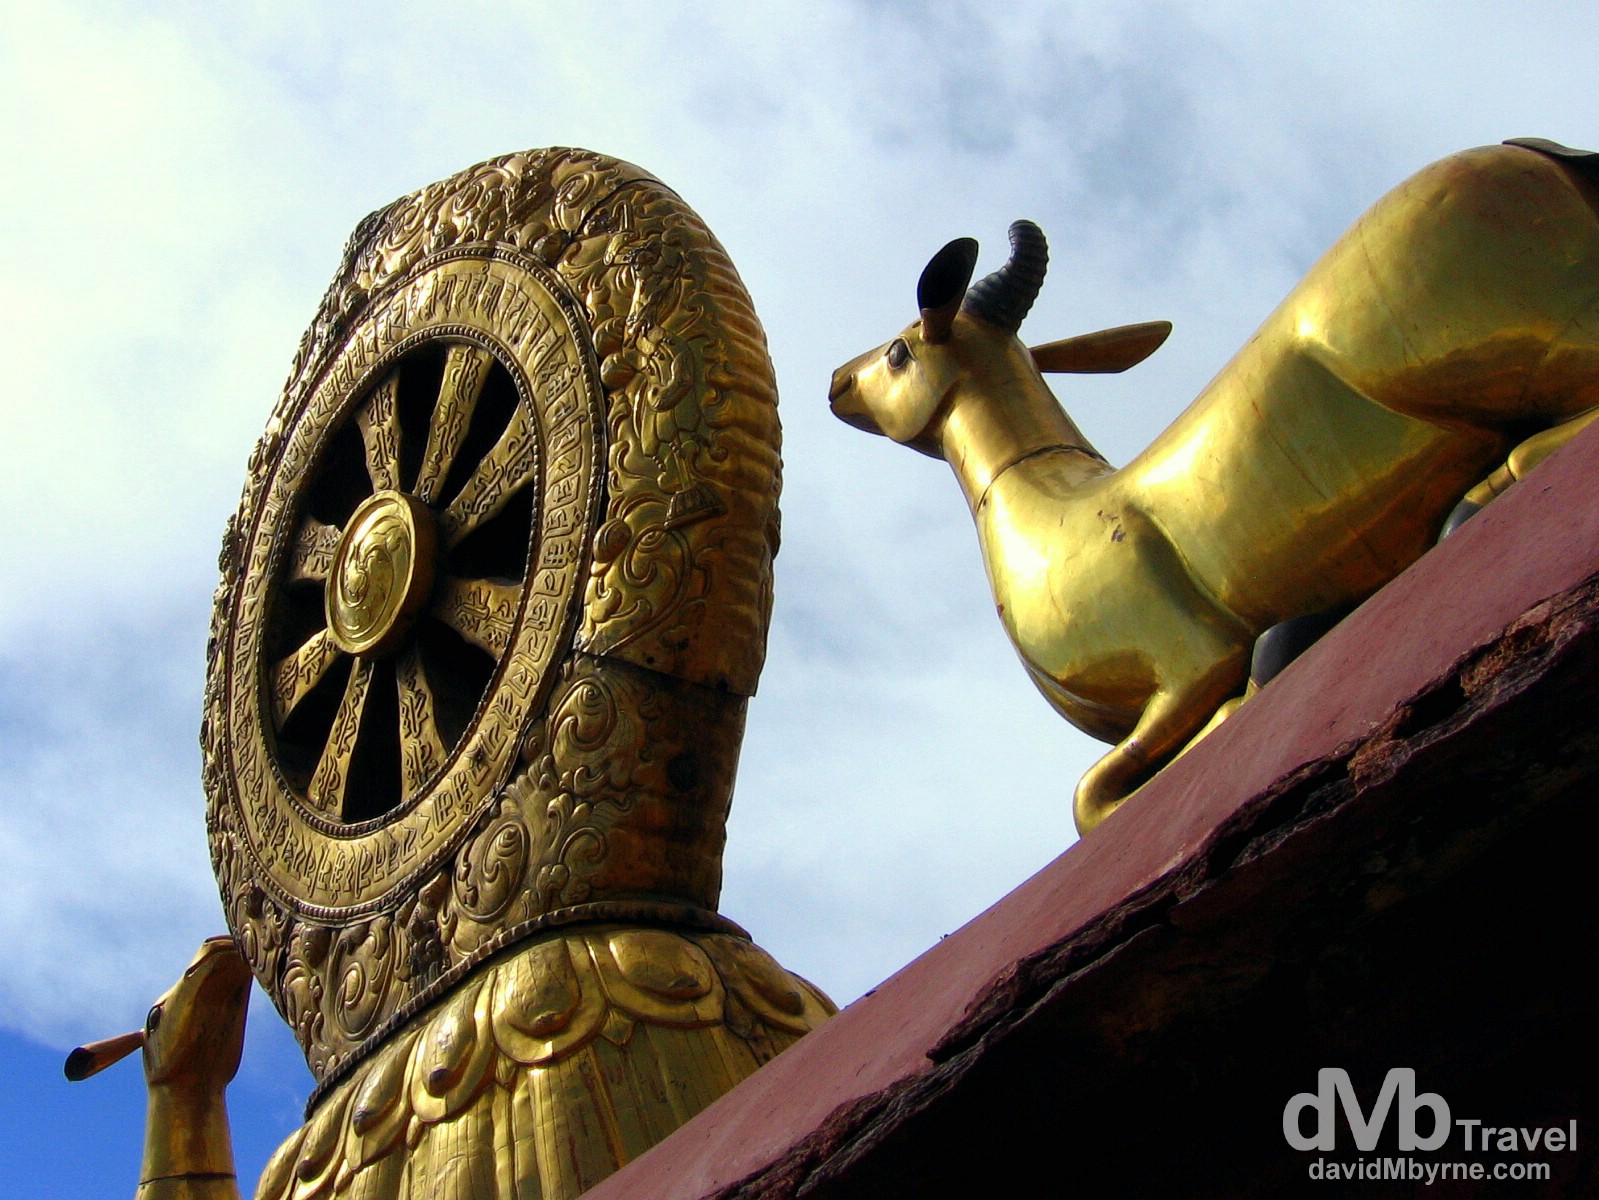 The roof of the Jokhang Temple in Lhasa, Tibet. February 27th, 2008.